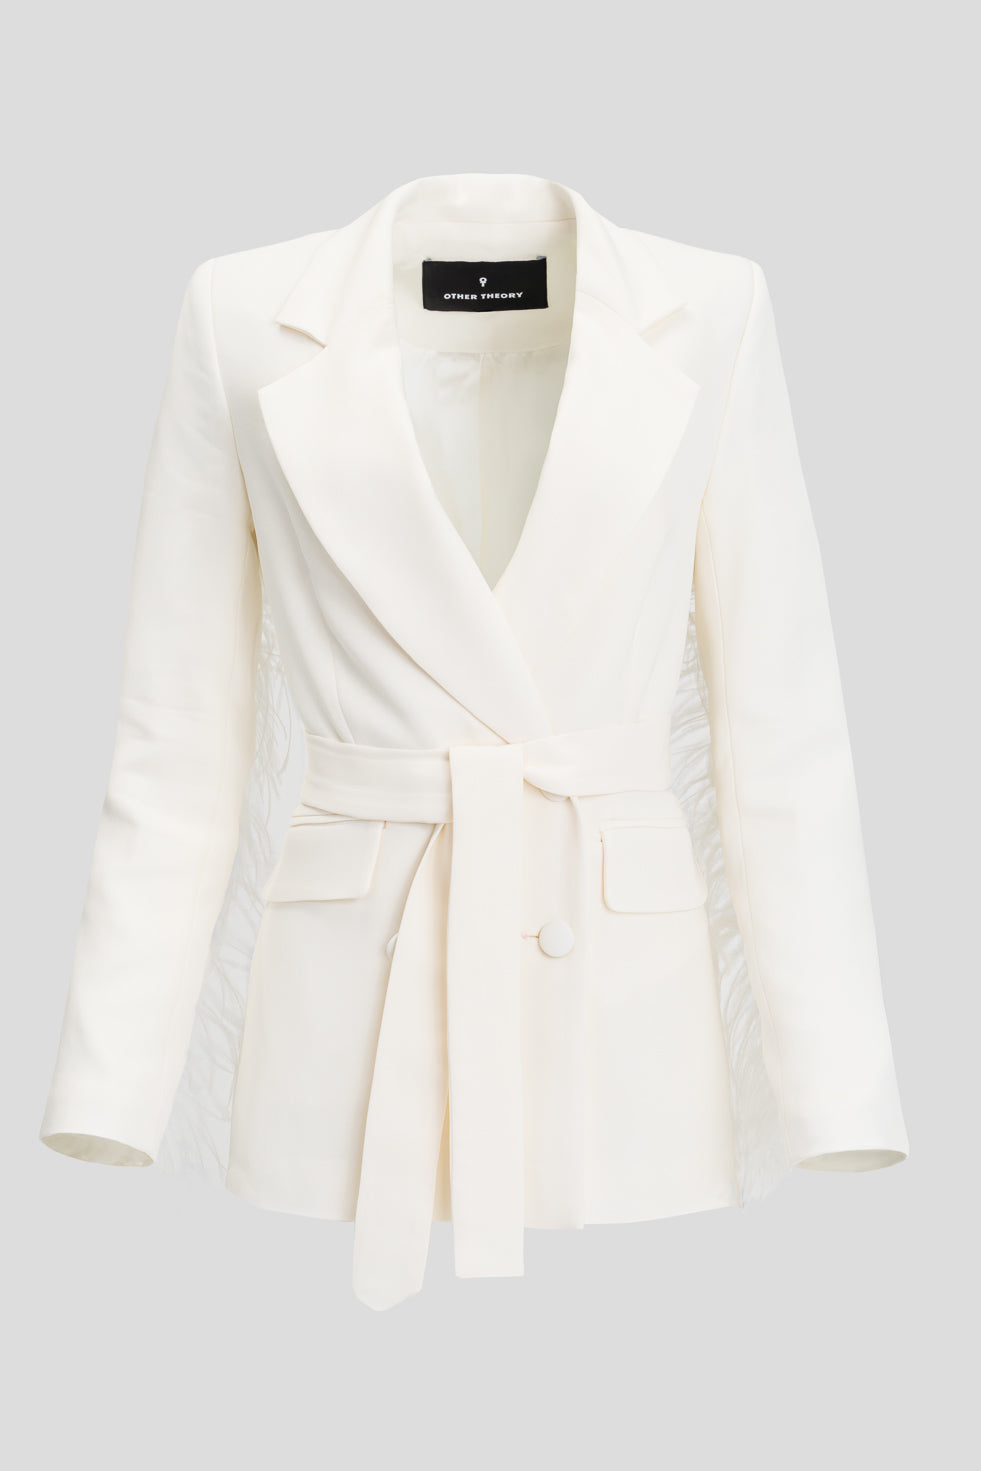 Ivy White Cotton blend feather embellished suit blazer